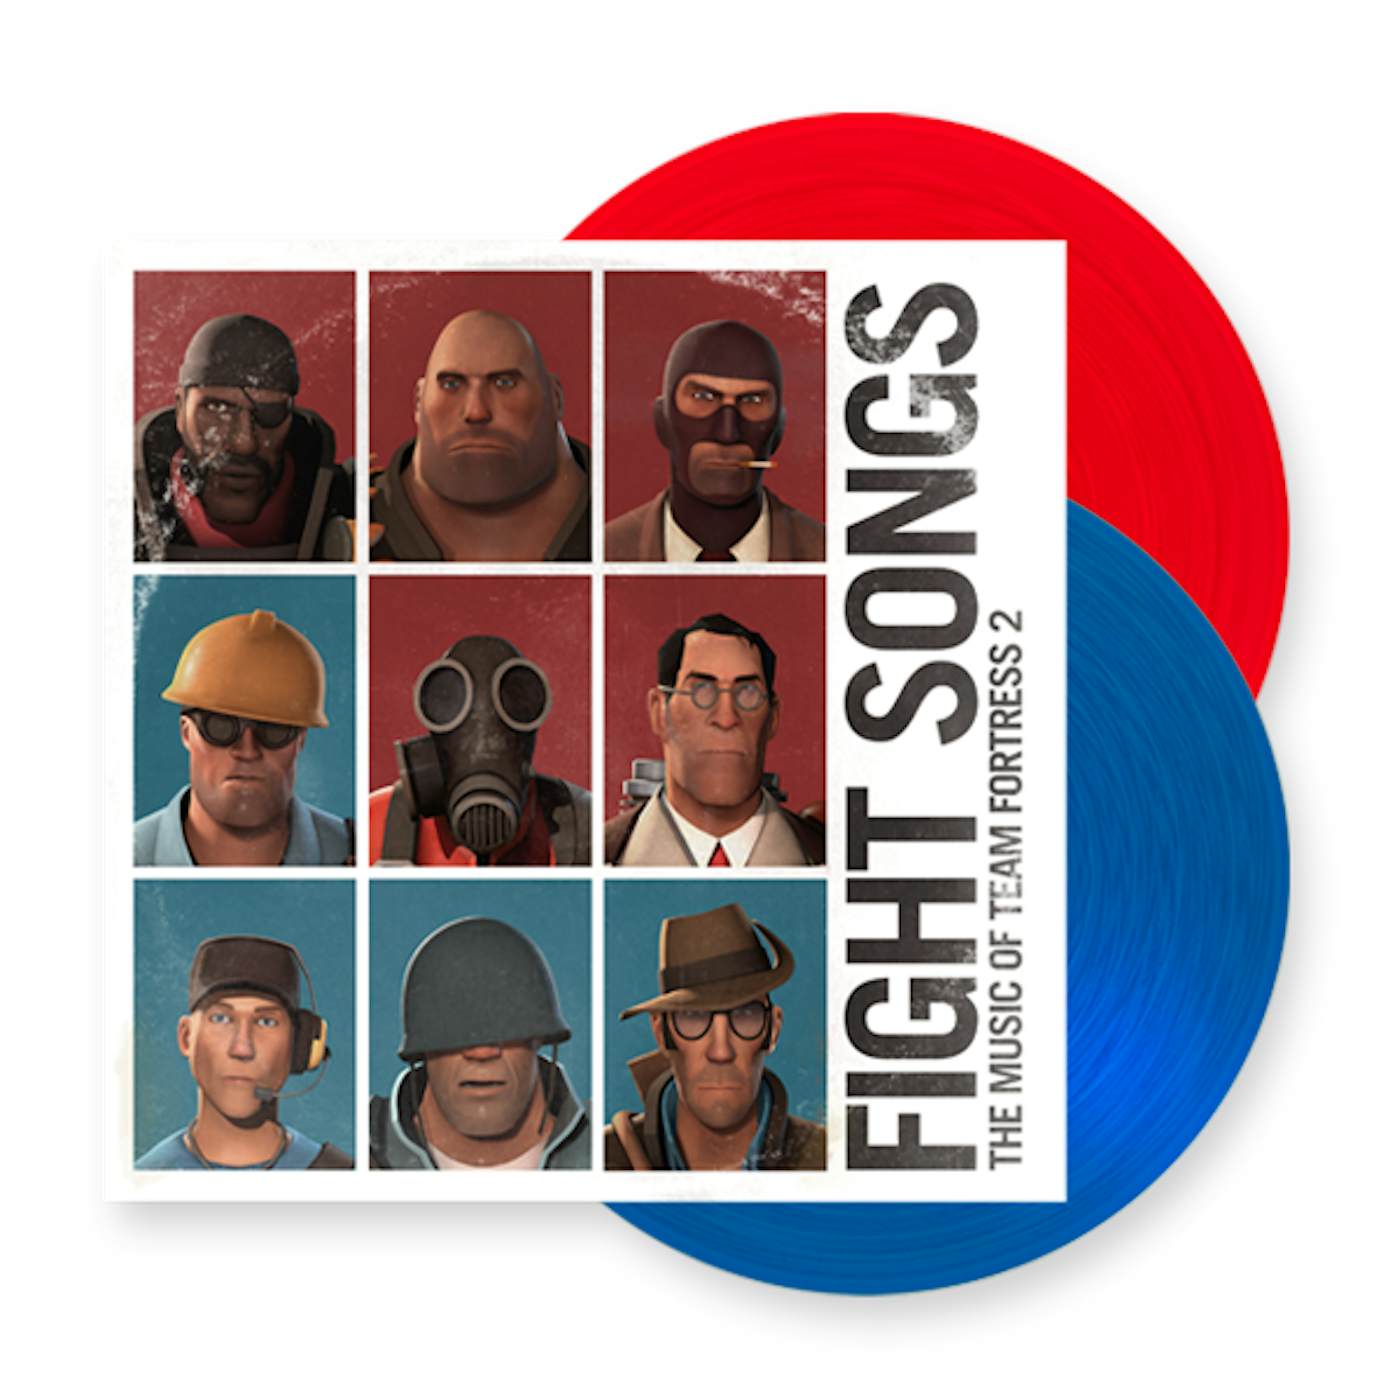 Valve Studio Orchestra FIGHT SONGS: THE MUSIC OF TEAM FORTRESS 2 (GATEFOLD/POSTER/GAME CARD) Vinyl Record